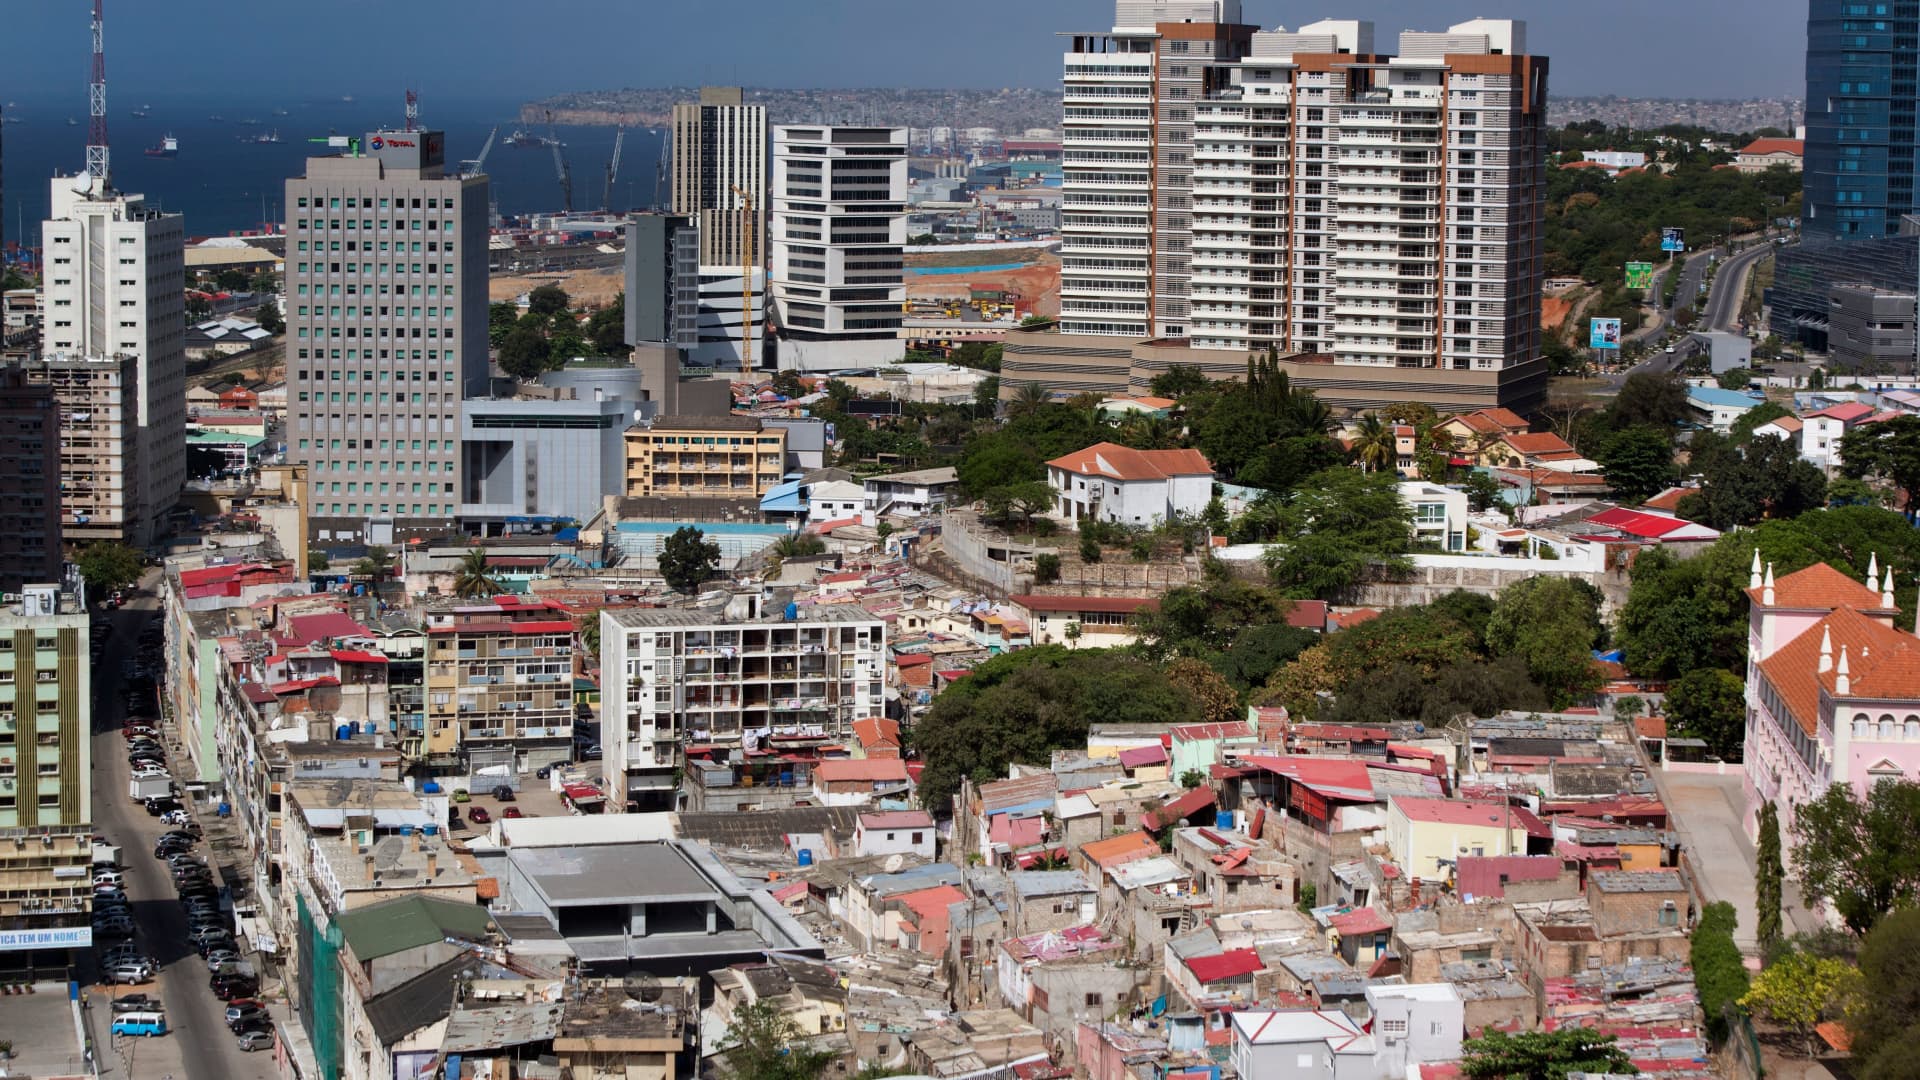 LUANDA, Angola - After the end of Angola's bloody civil war in 2002, the country enjoyed a decade of rapid growth fuelled by its booming oil sector. But in 2014, a global slump in the price of crude, which accounts for 70 percent of government revenues, and the failure of the authorities to diversify the economy, plunged Angola into a serious financial crisis.